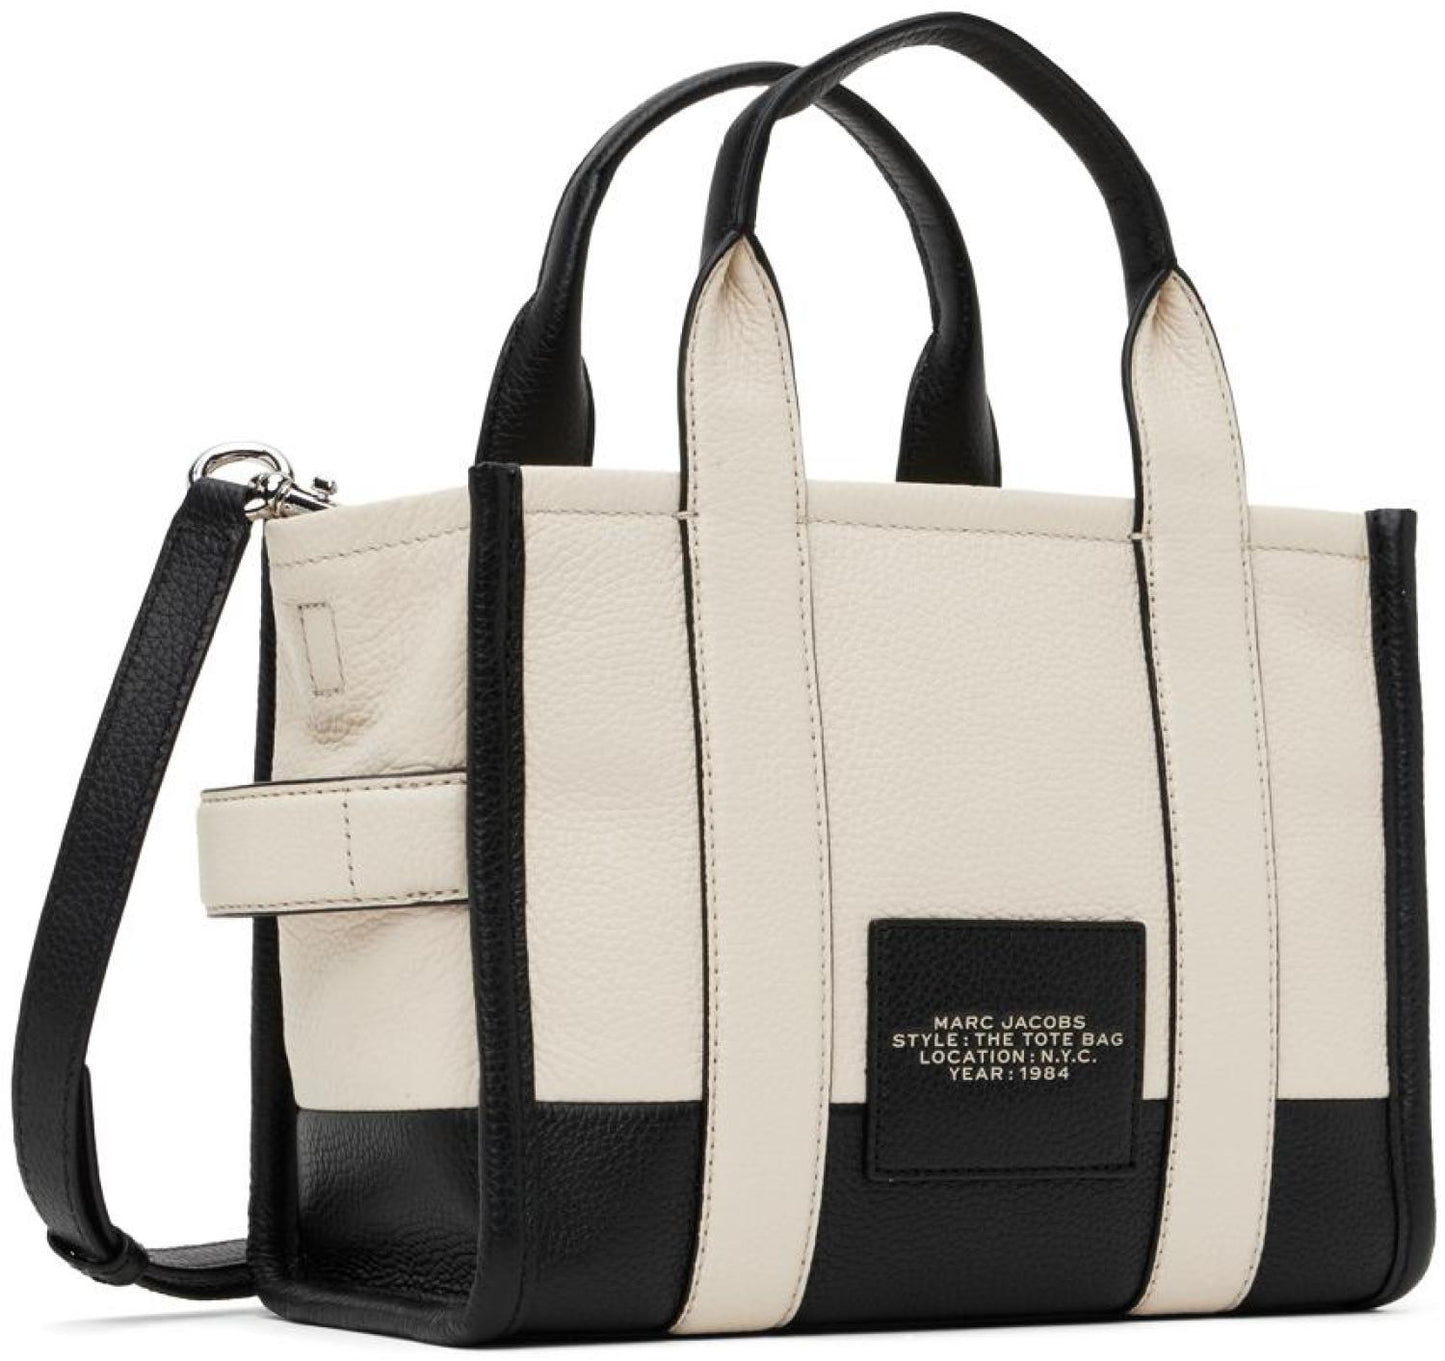 The Colorblock Small Tote Bag, Marc Jacobs